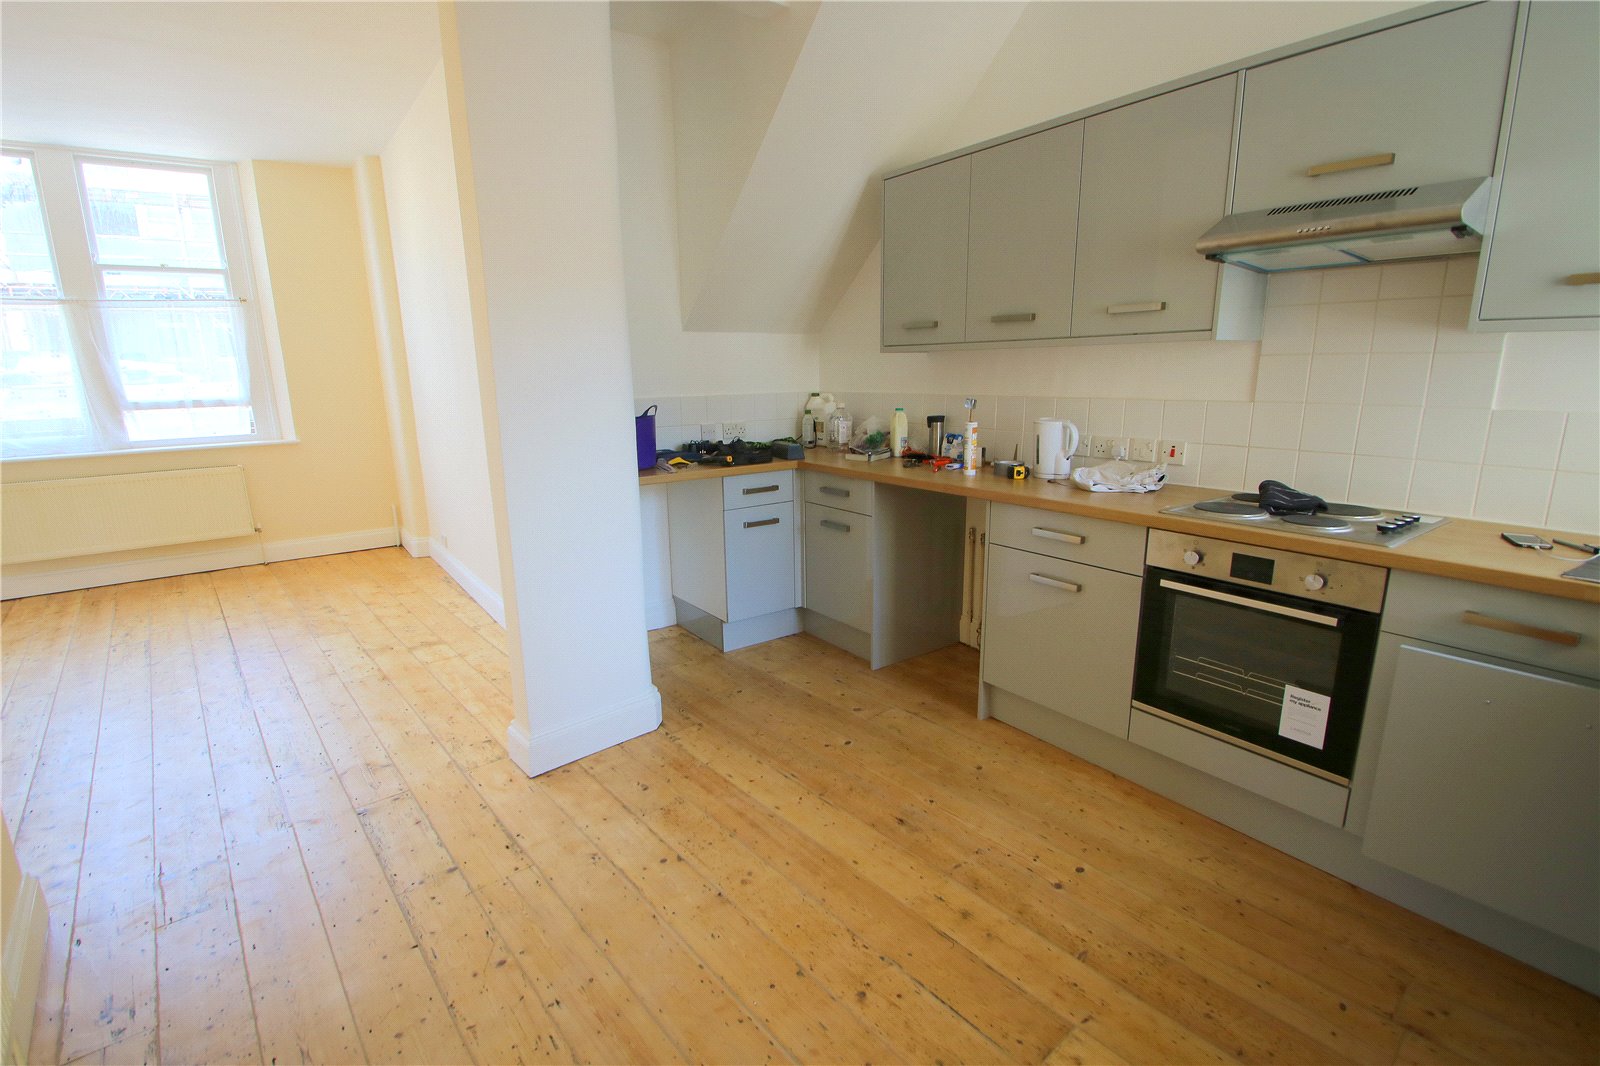 Cj Hole Southville 1 Bedroom Flat To Rent In Winchester Road